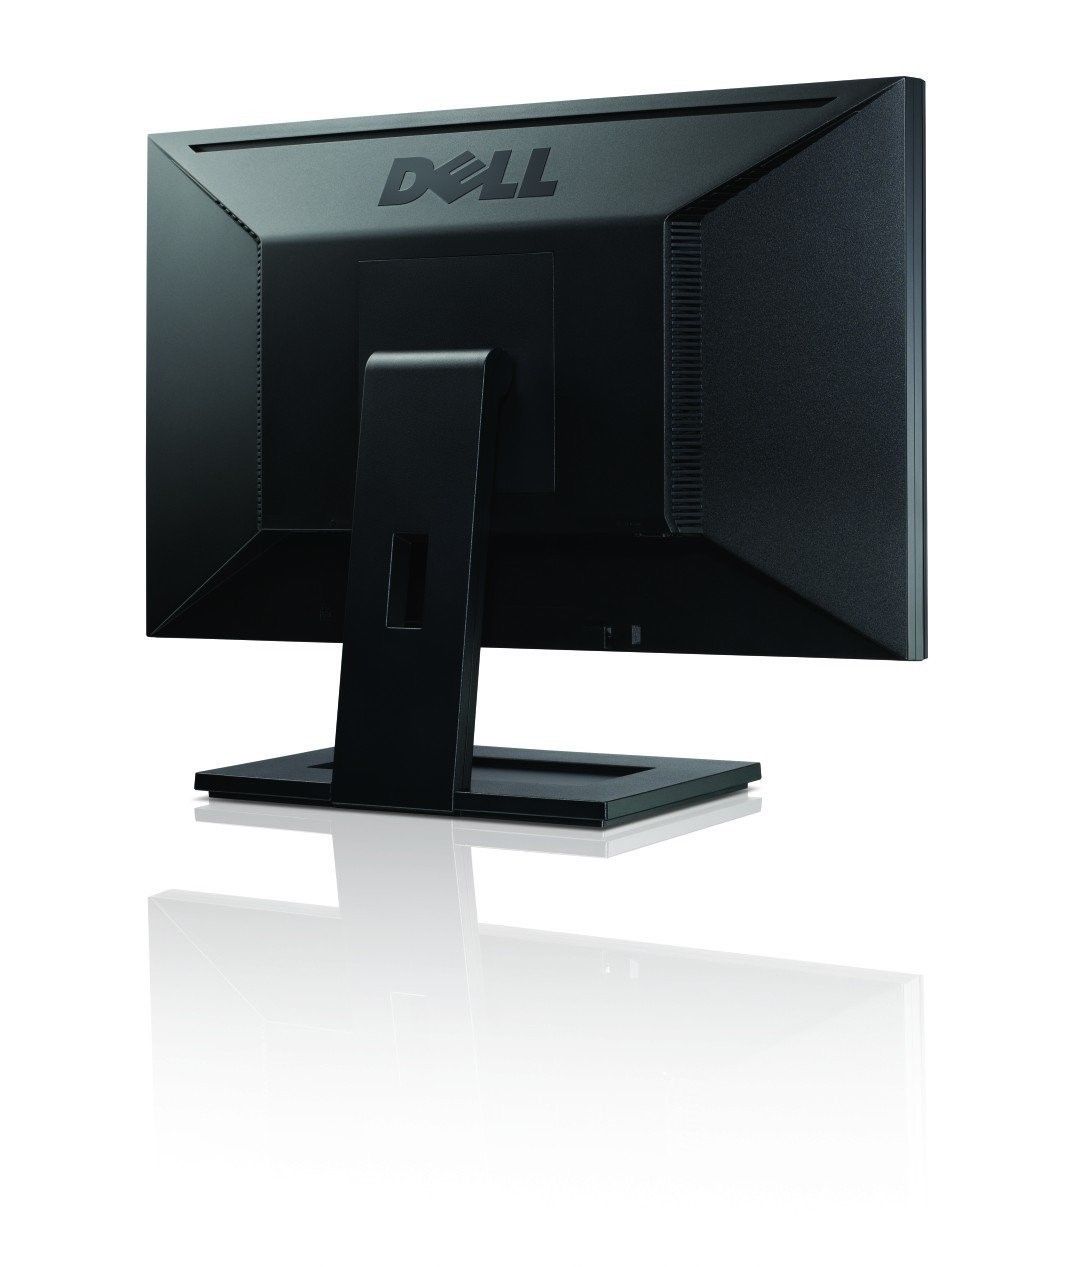 Dell IN2020MB Widescreen LED LCD Monitor 20'' 1600x900 Black 94WNT 094WNT